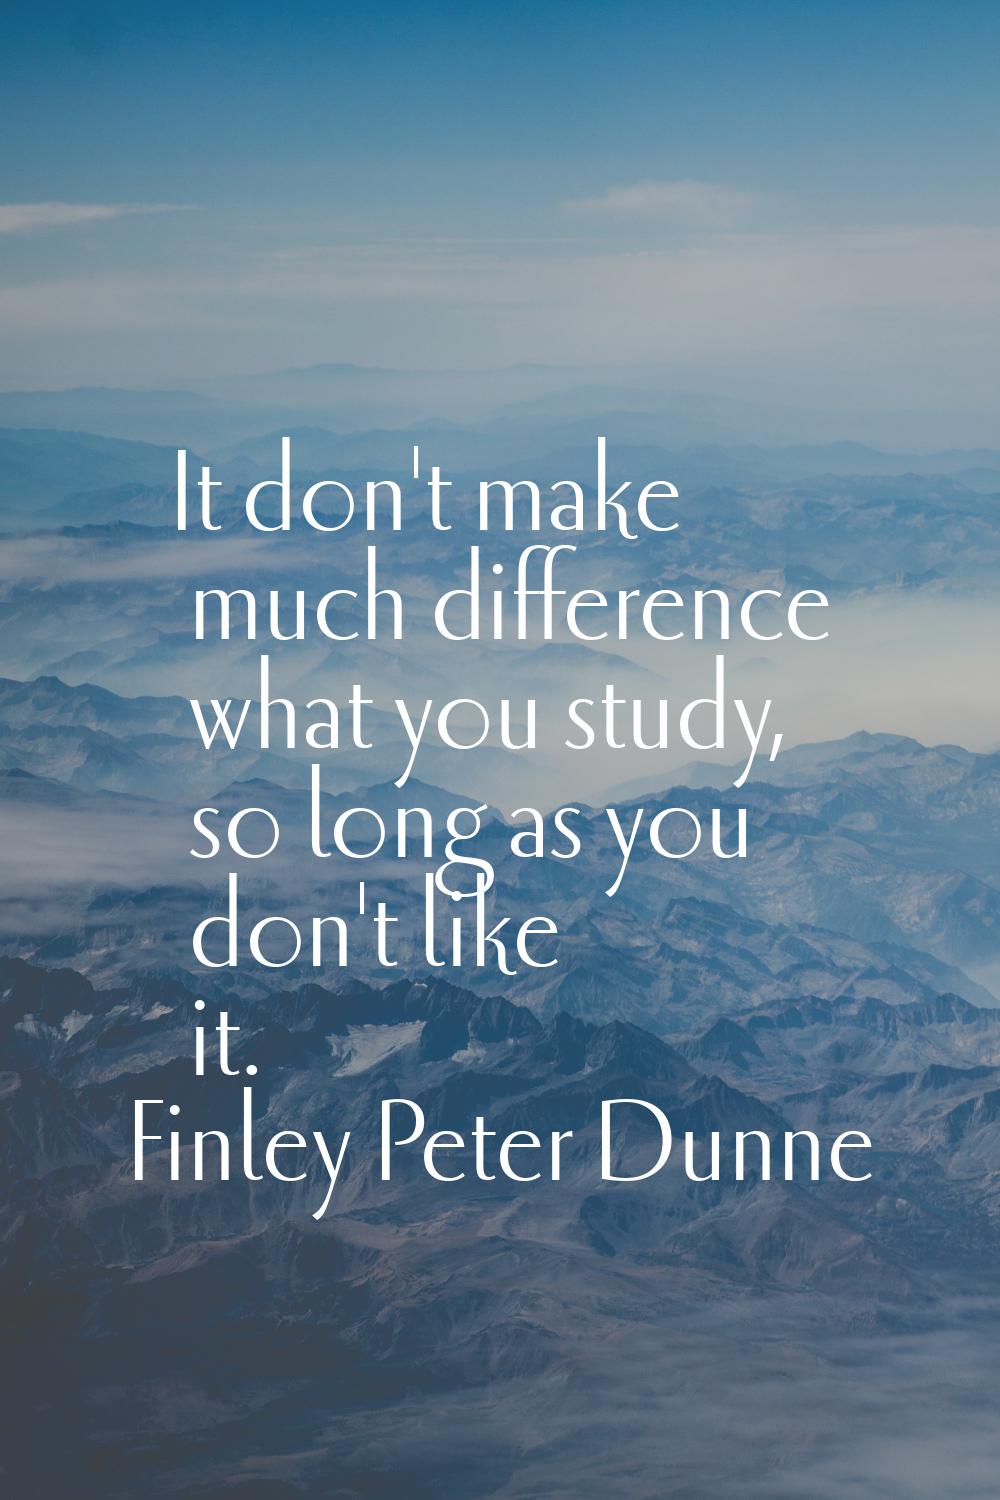 It don't make much difference what you study, so long as you don't like it.